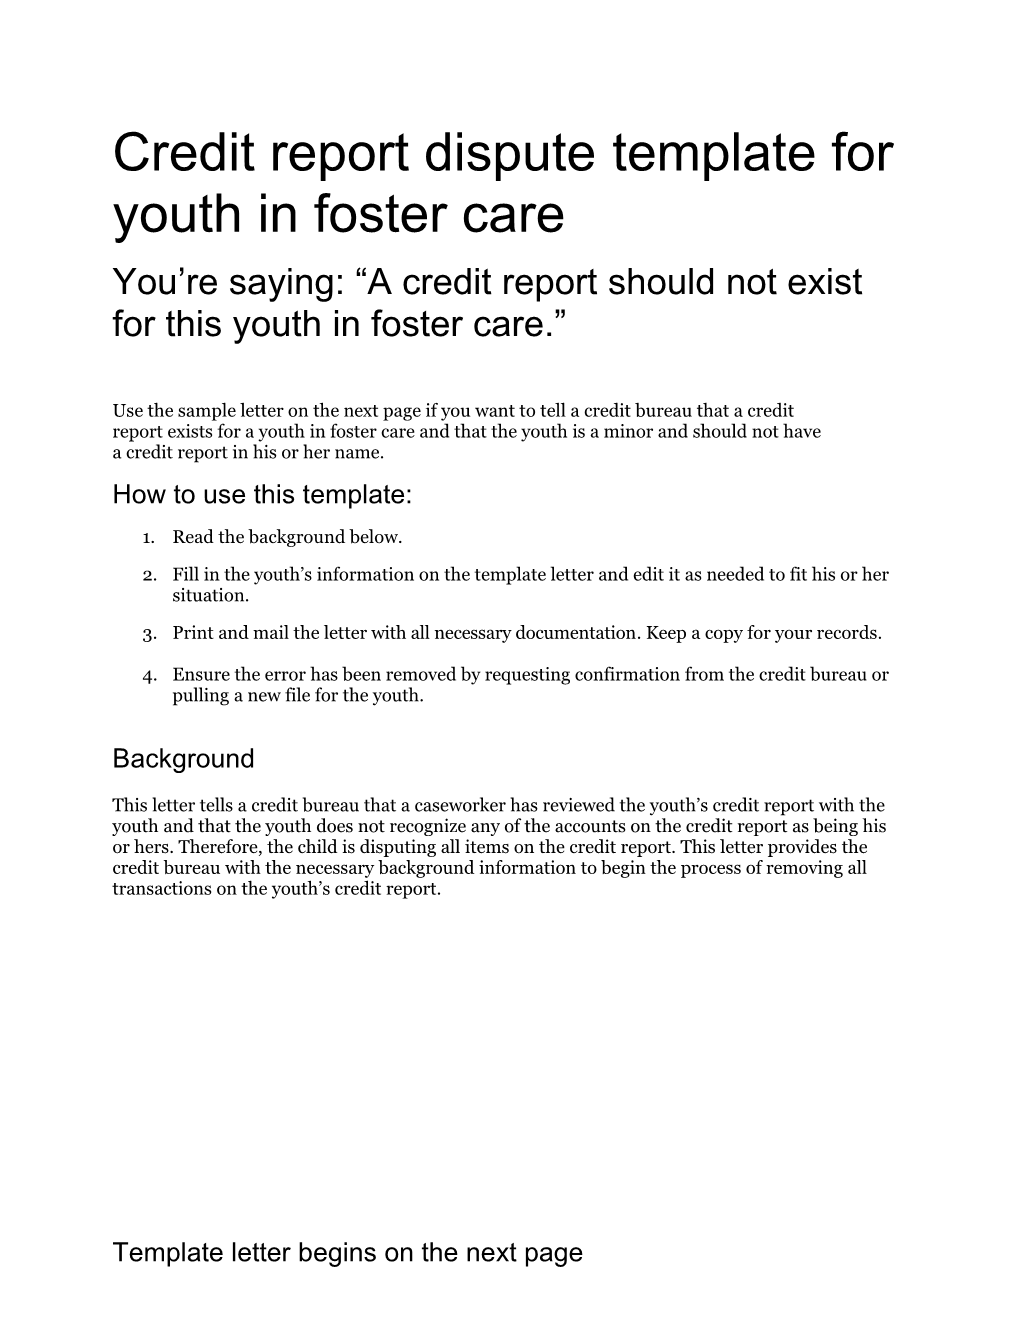 Credit Report Disputetemplate for Youth in Foster Care